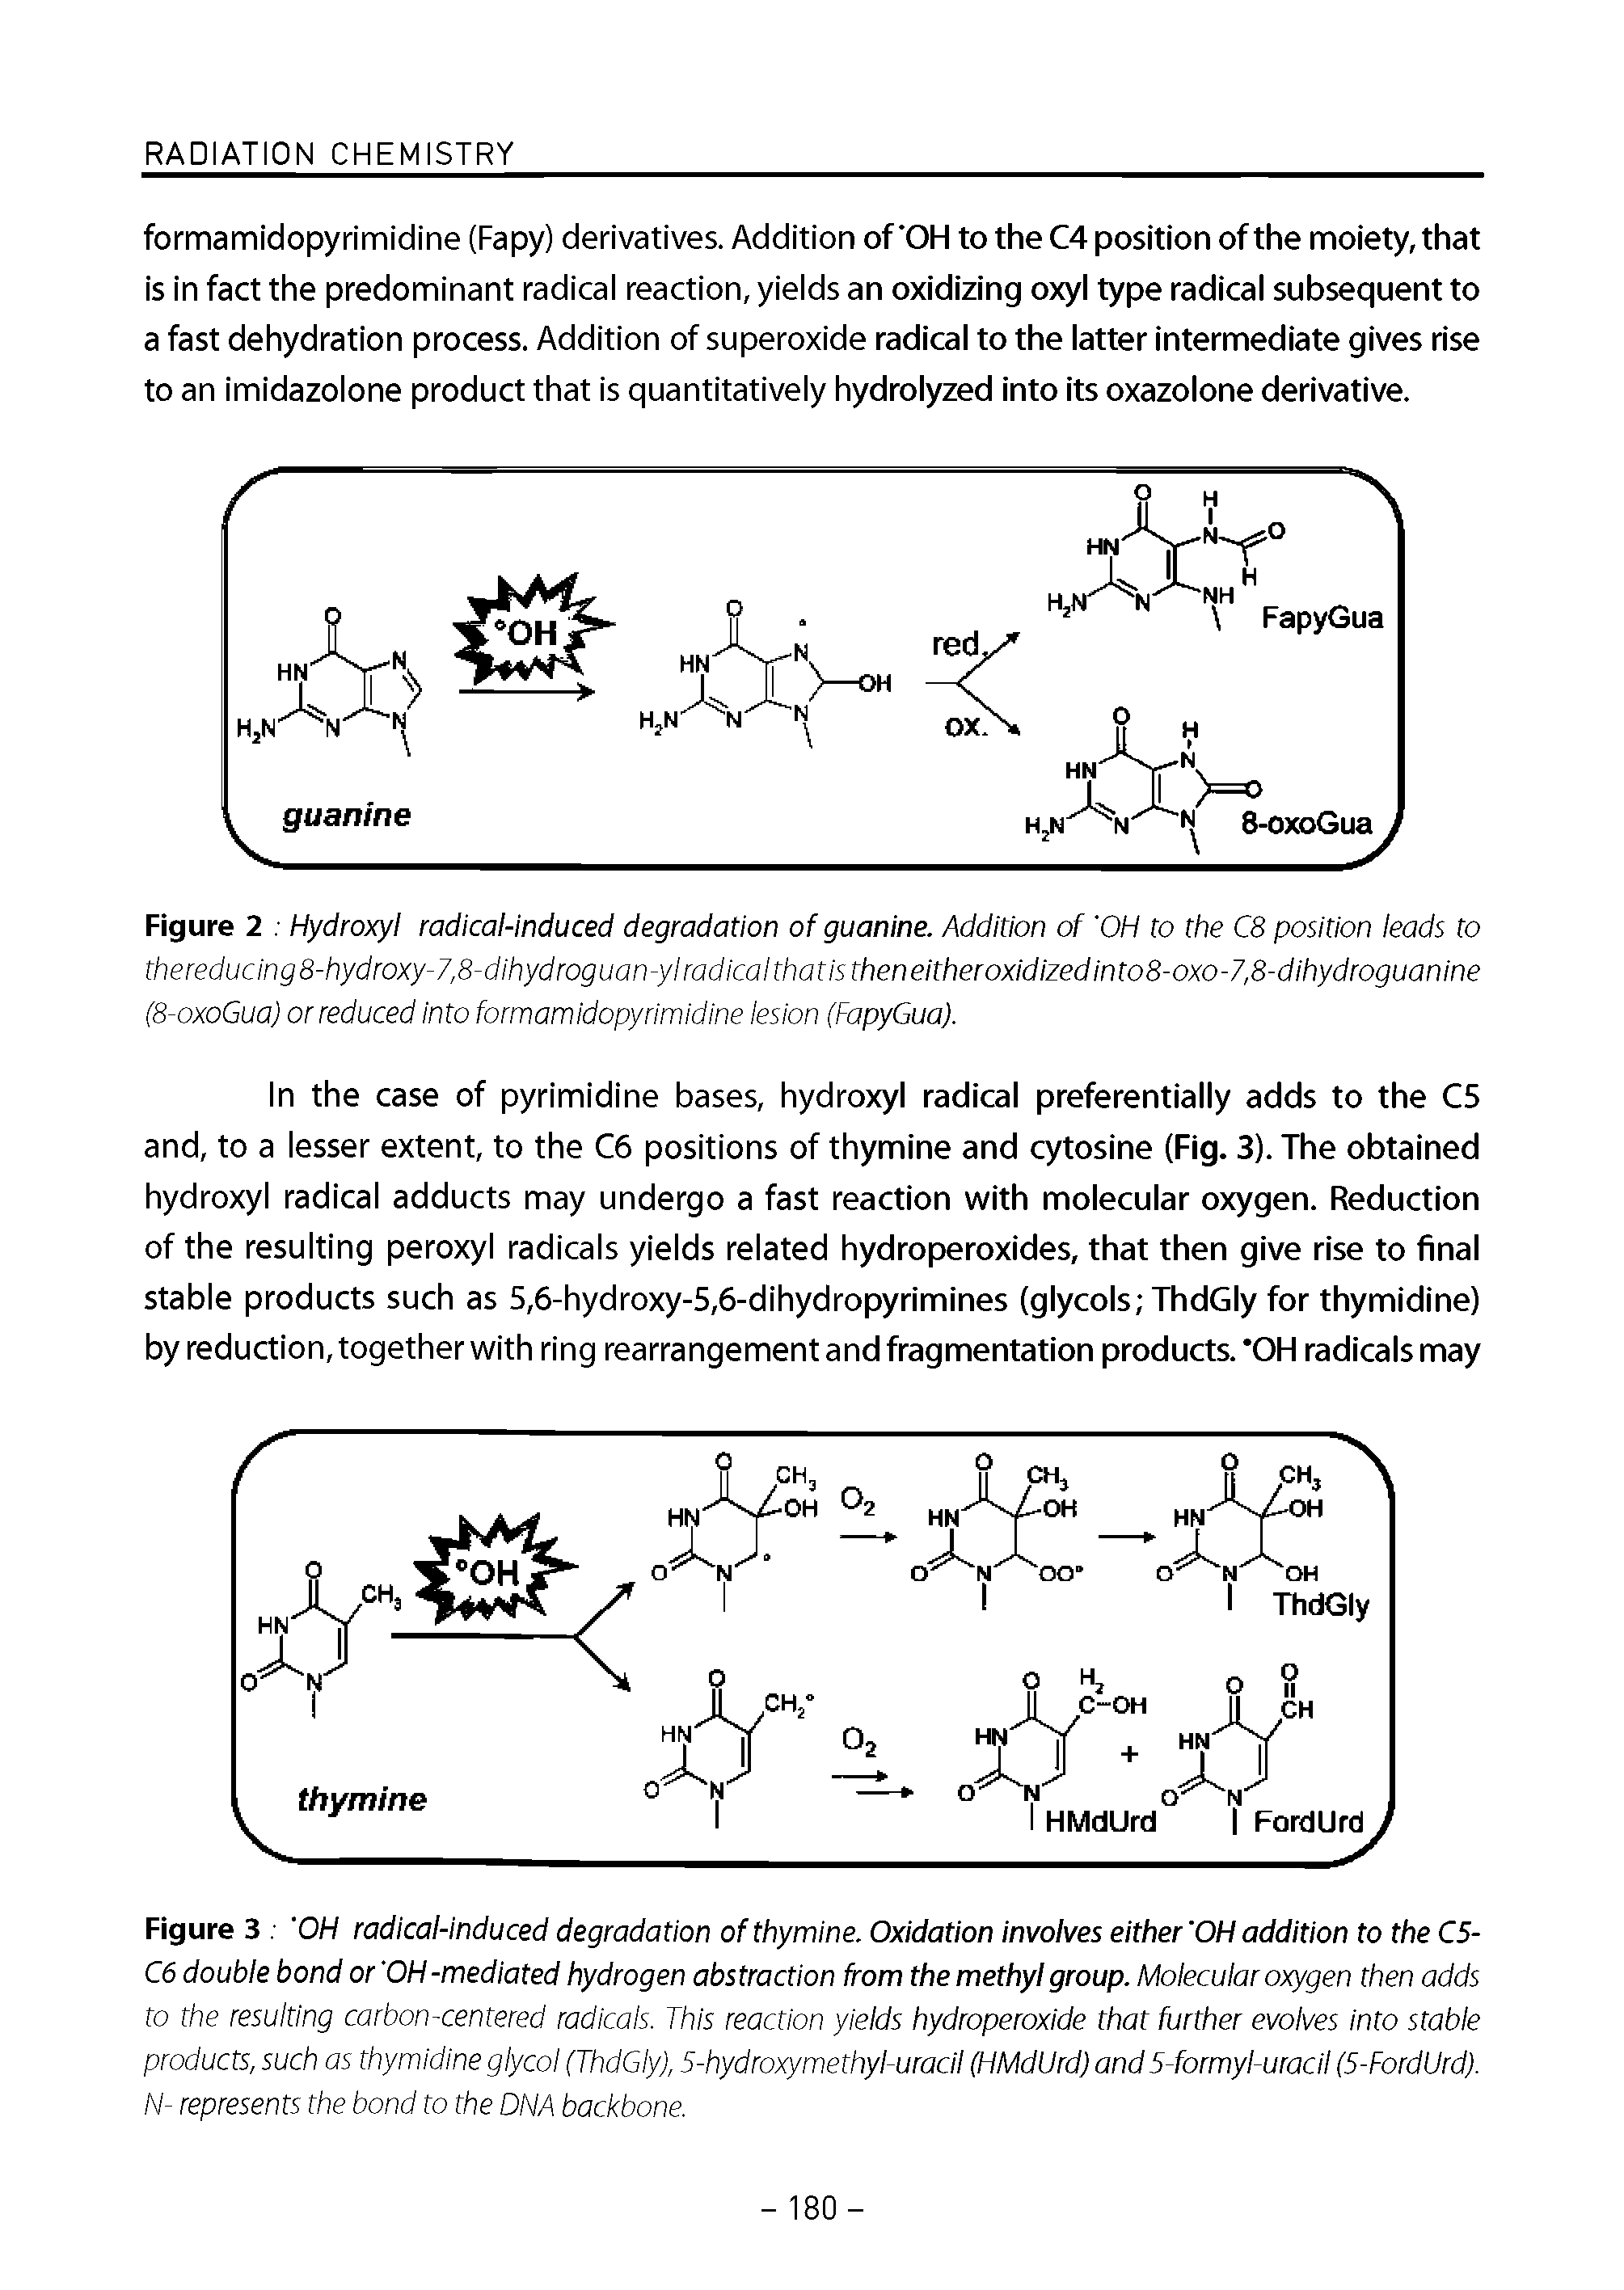 Figure 3. OH radical-induced degradation of thymine. Oxidation involves either OH addition to the C5-06 double bond or OH-mediated hydrogen abstraction from the methyl group. Molecular oxygen then adds to the resulting carbon-centered radicals. This reaction yields hydroperoxide that further evolves into stable products, such as thymidine glycol (ThdGly), 5-hydroxymethyl-uracil (HMdUrd) and 5 formyl-uracil (5-FordUrd). N- represents the bond to the DNA backbone.